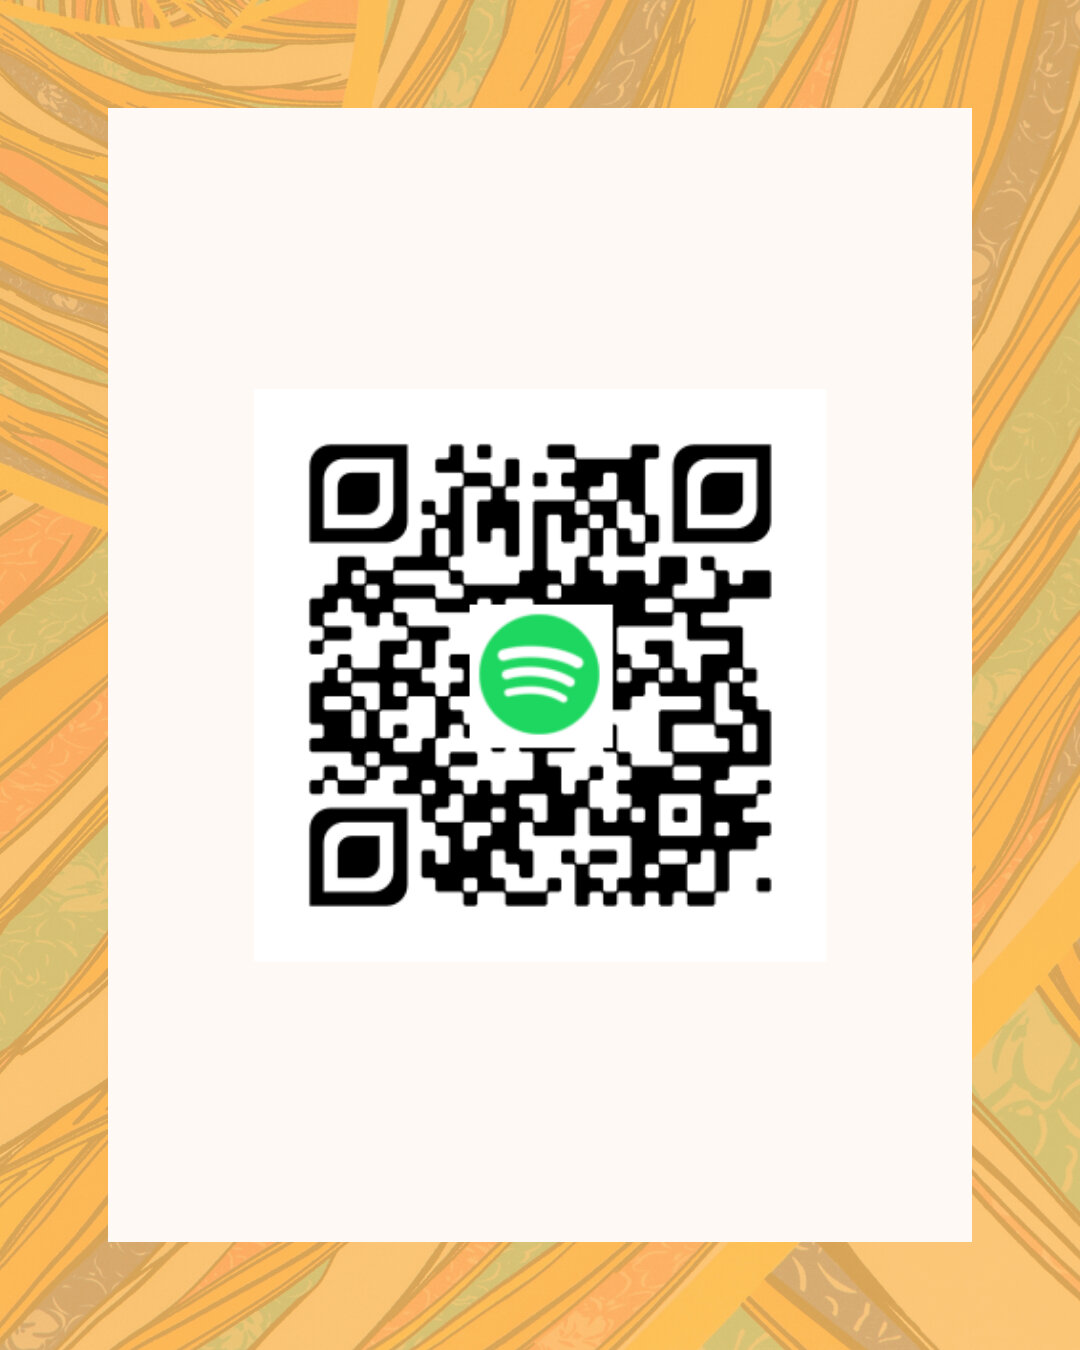 Scan and start listening to our Erheer Playlist now.